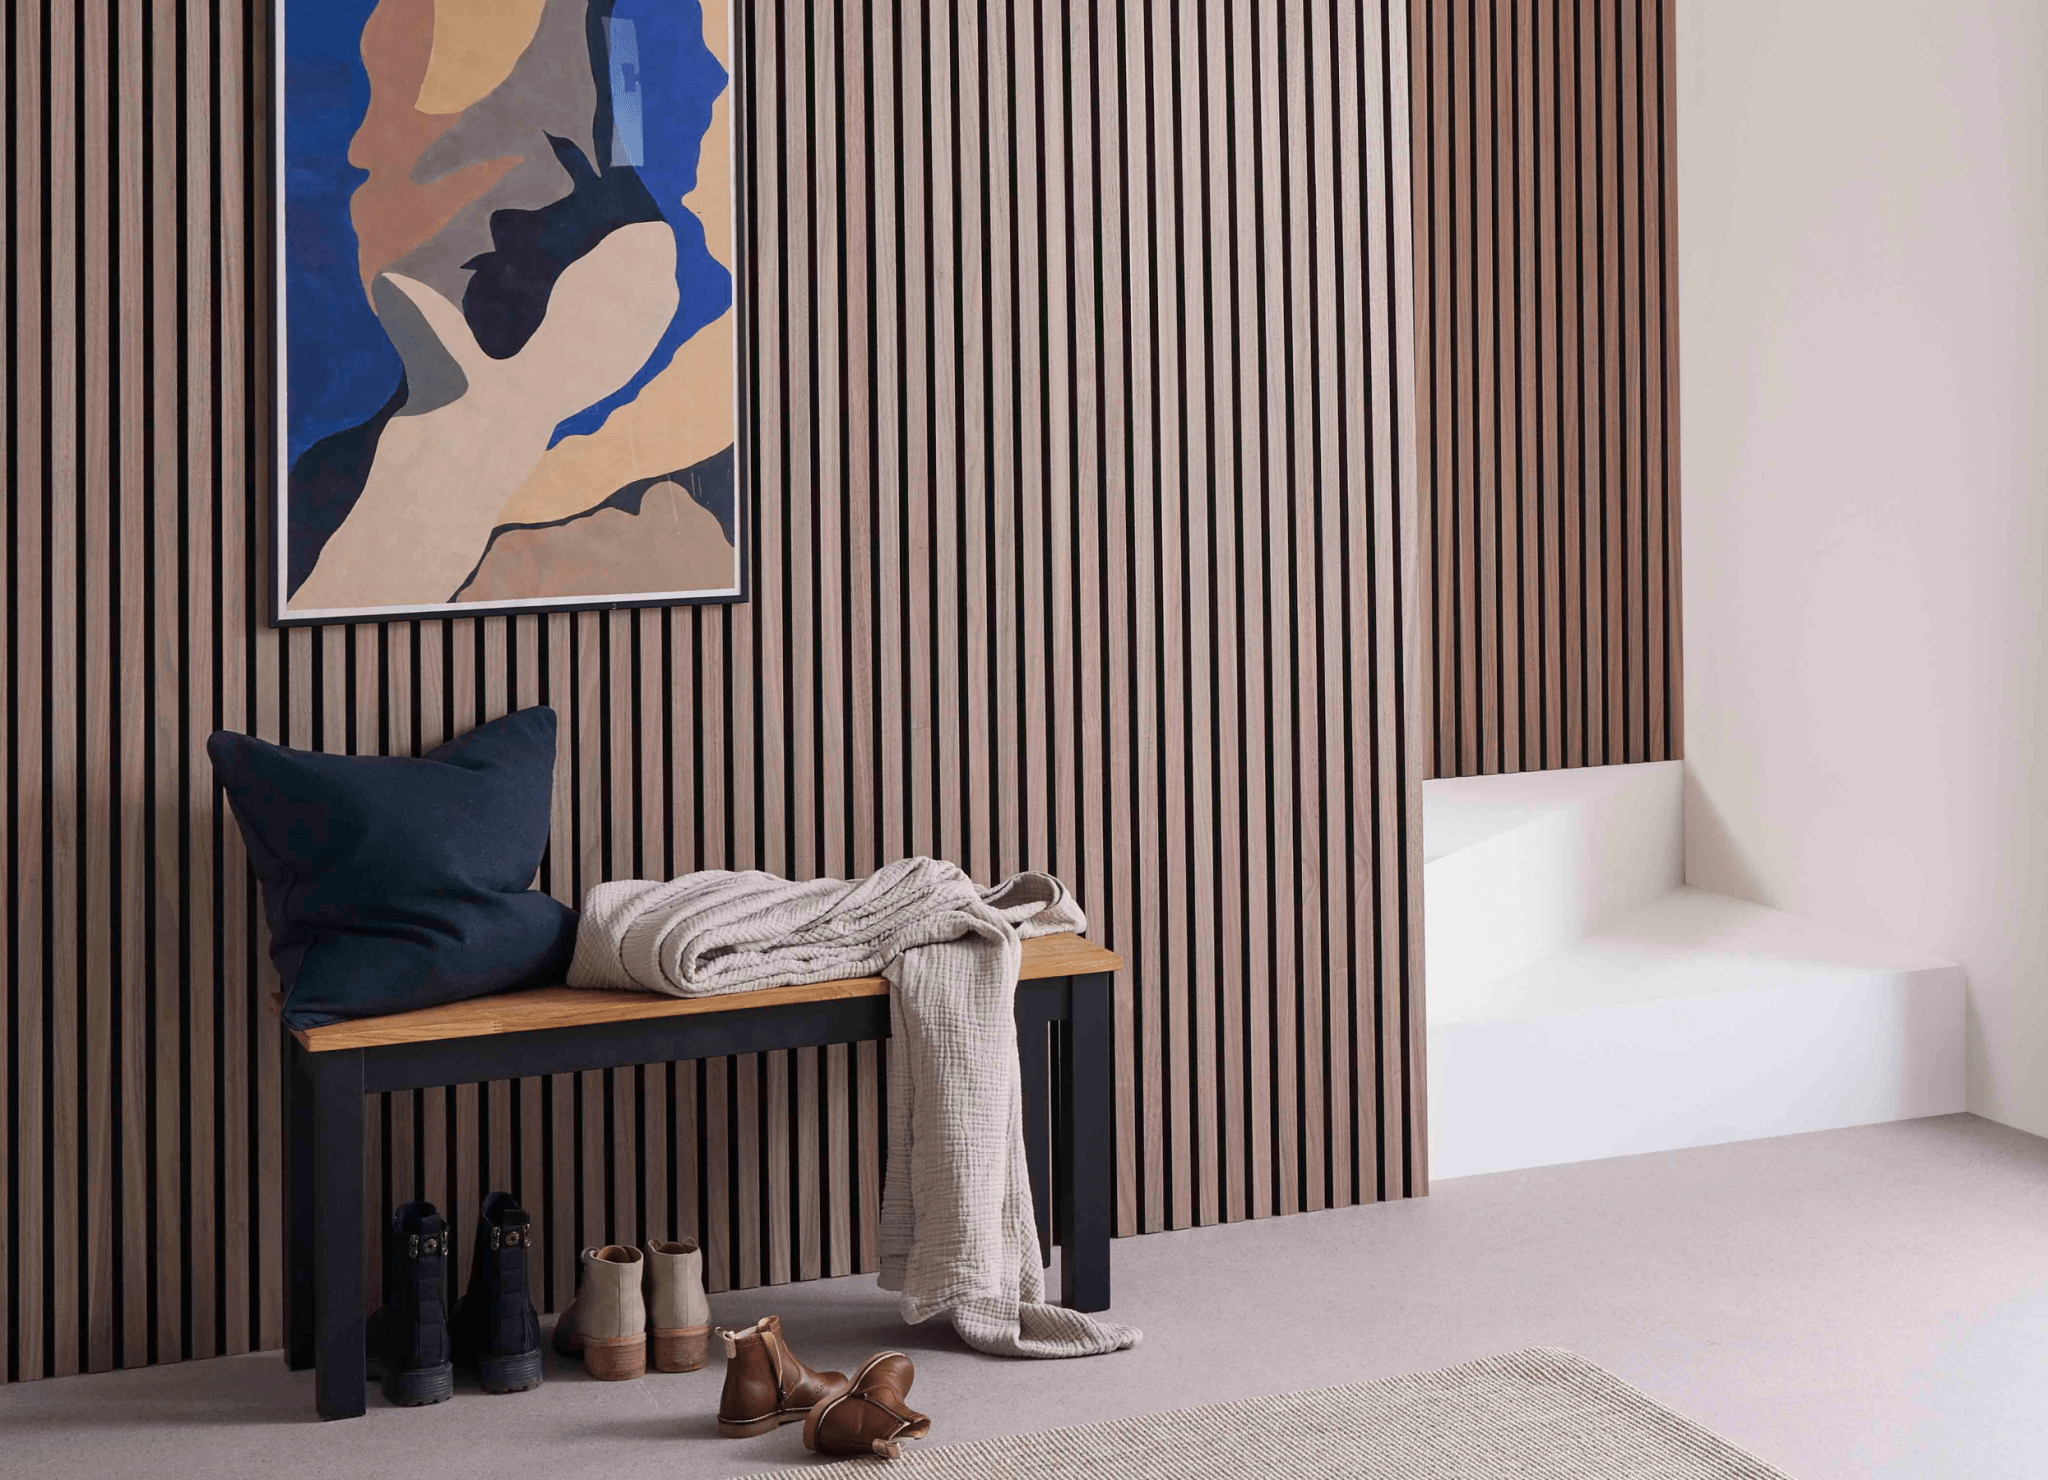 Hallway wall decorating idea featuring SlatWall Walnut wood veneer panels, a blue and beige painting and matching bench.